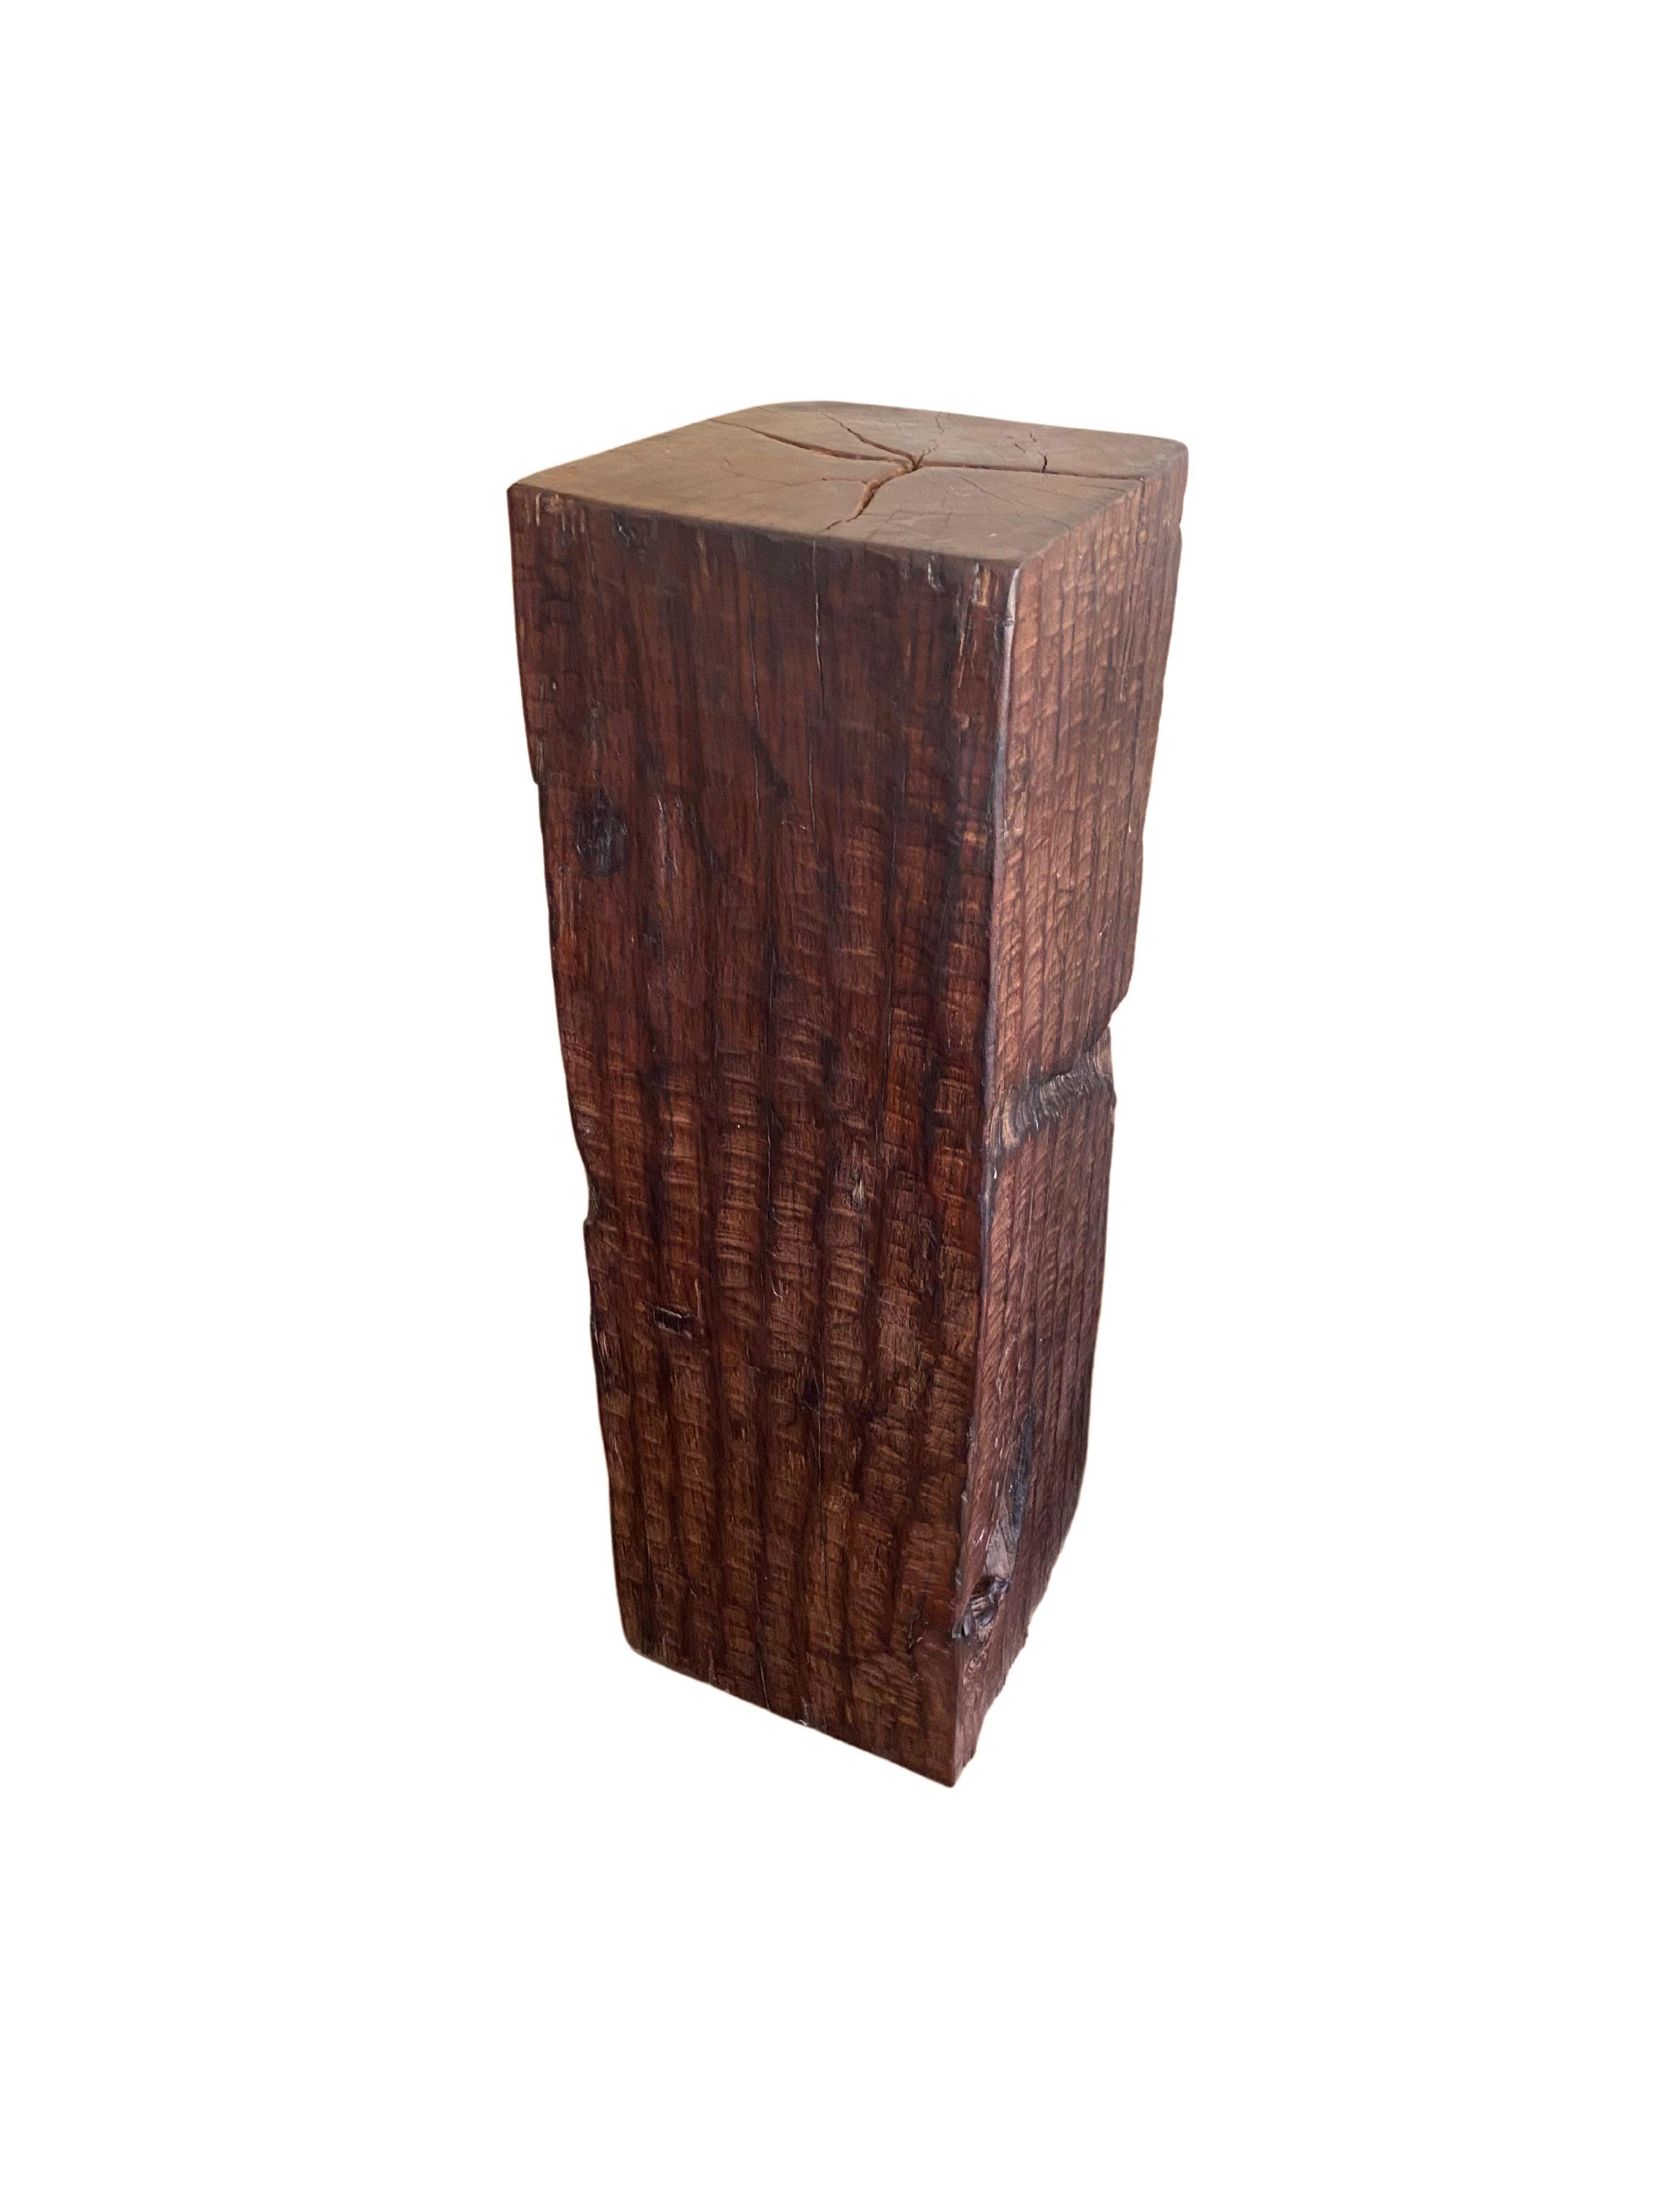 Hand-Crafted Solid Iron Wood Pedestal with Stunning Wood Texture For Sale